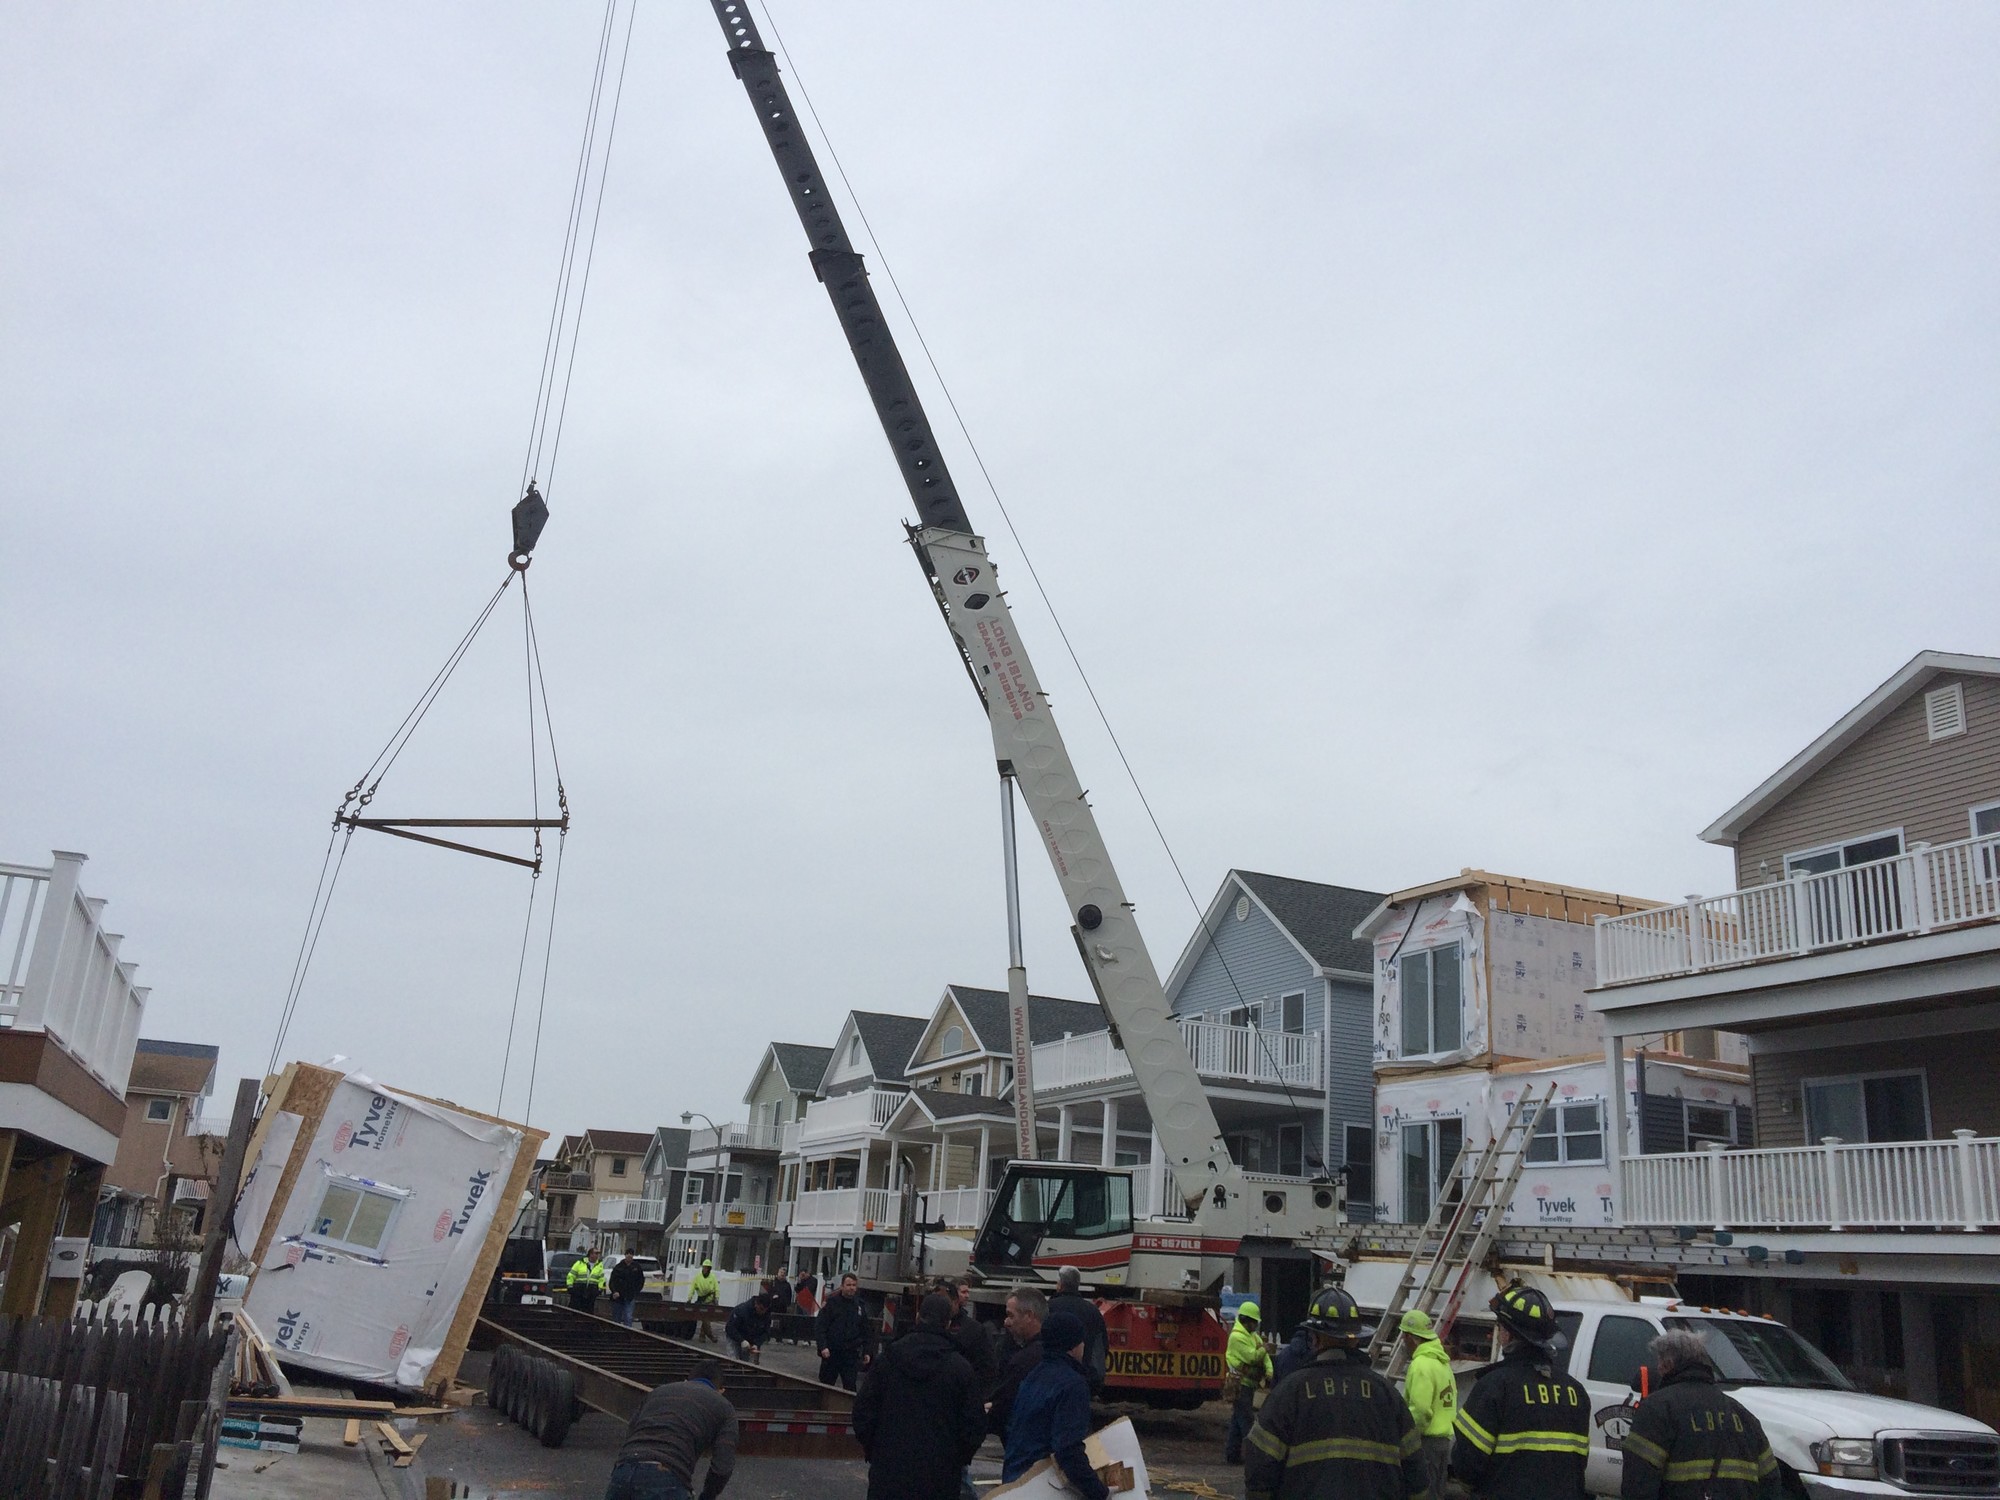 Police and firefighters responded to Pennsylvania Avenue on Friday after a crane lifting a section of a modular home broke loose.